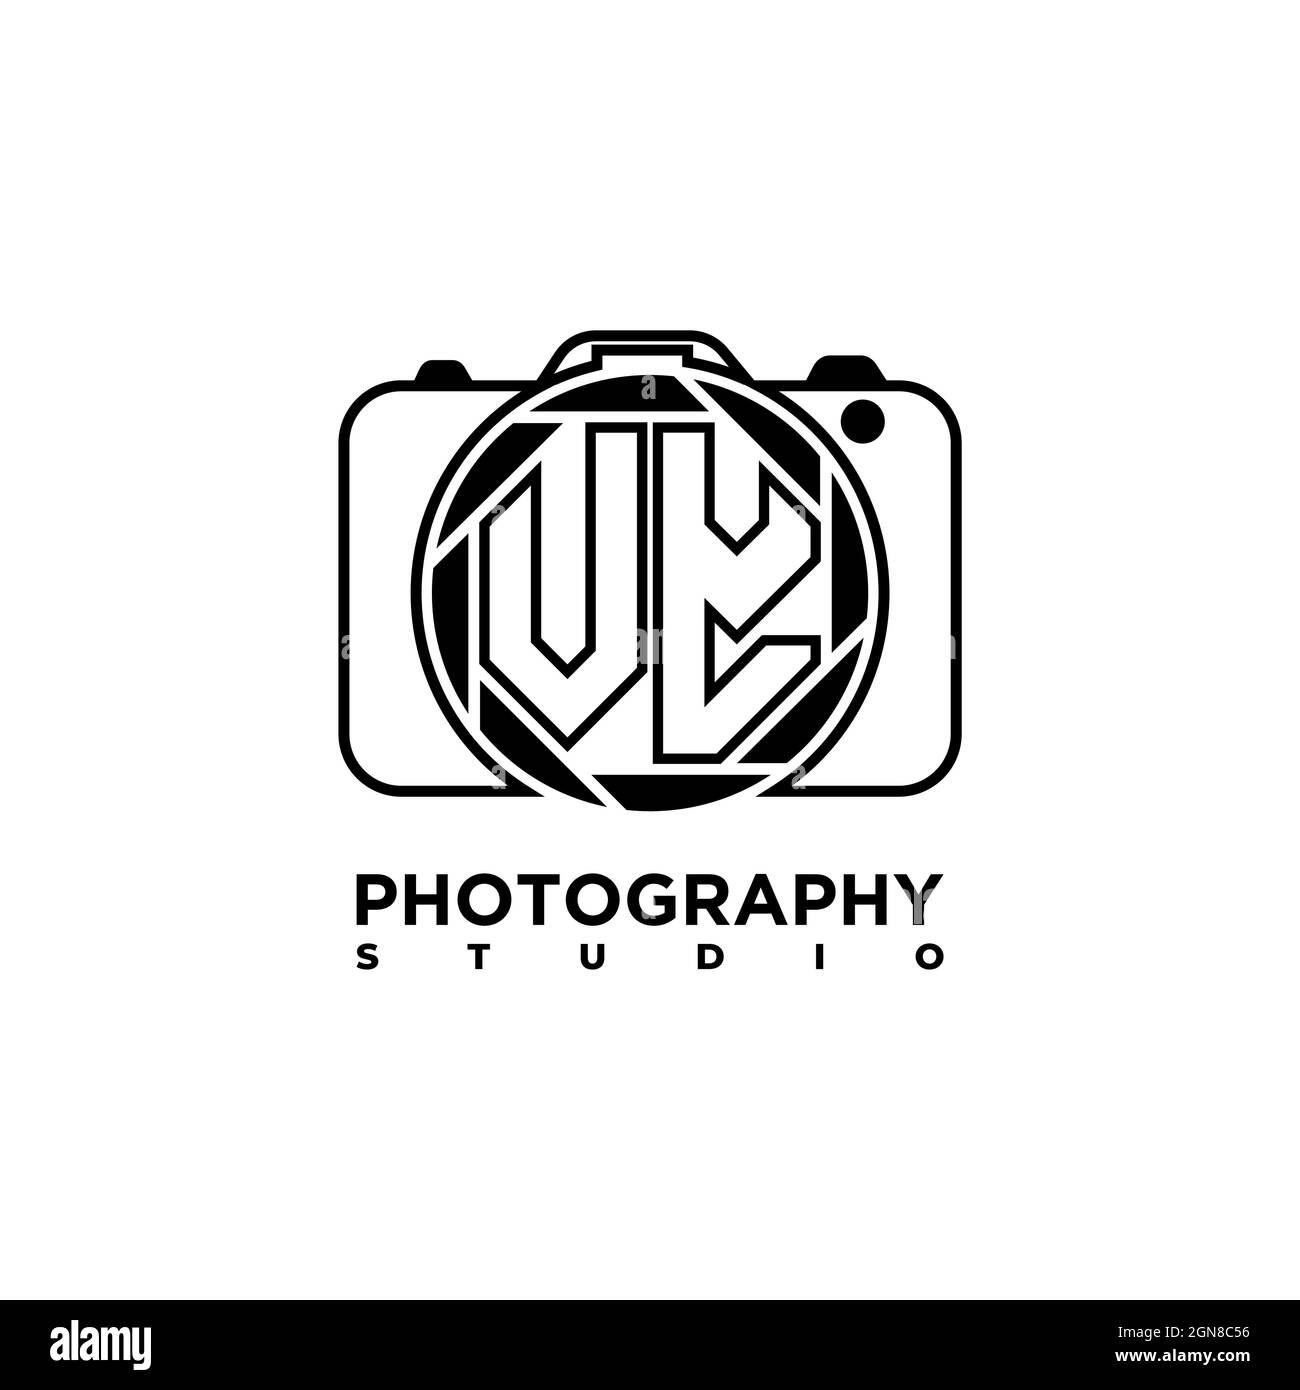 VY Logo letter Geometric Photograph Camera shape style template vector Stock Vector